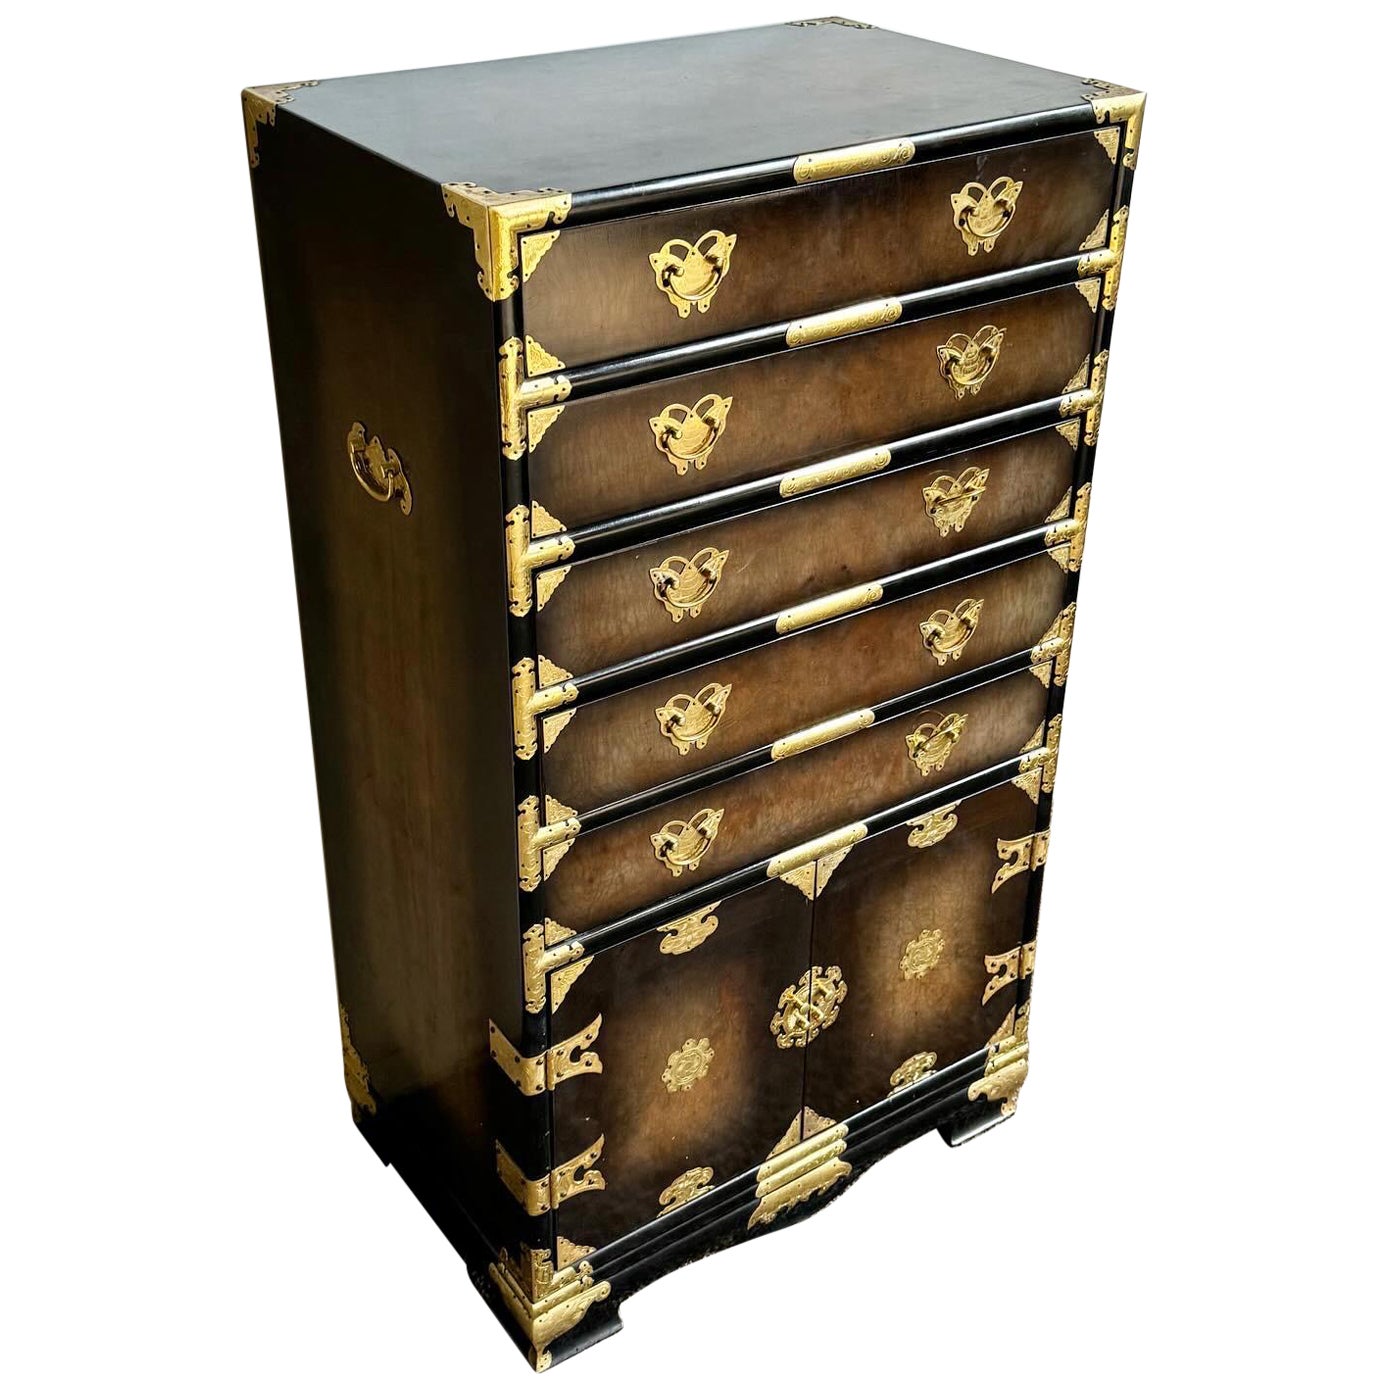 Chinoiserie Jewelry Armoire With Gold Accents 5 Drawers For Sale